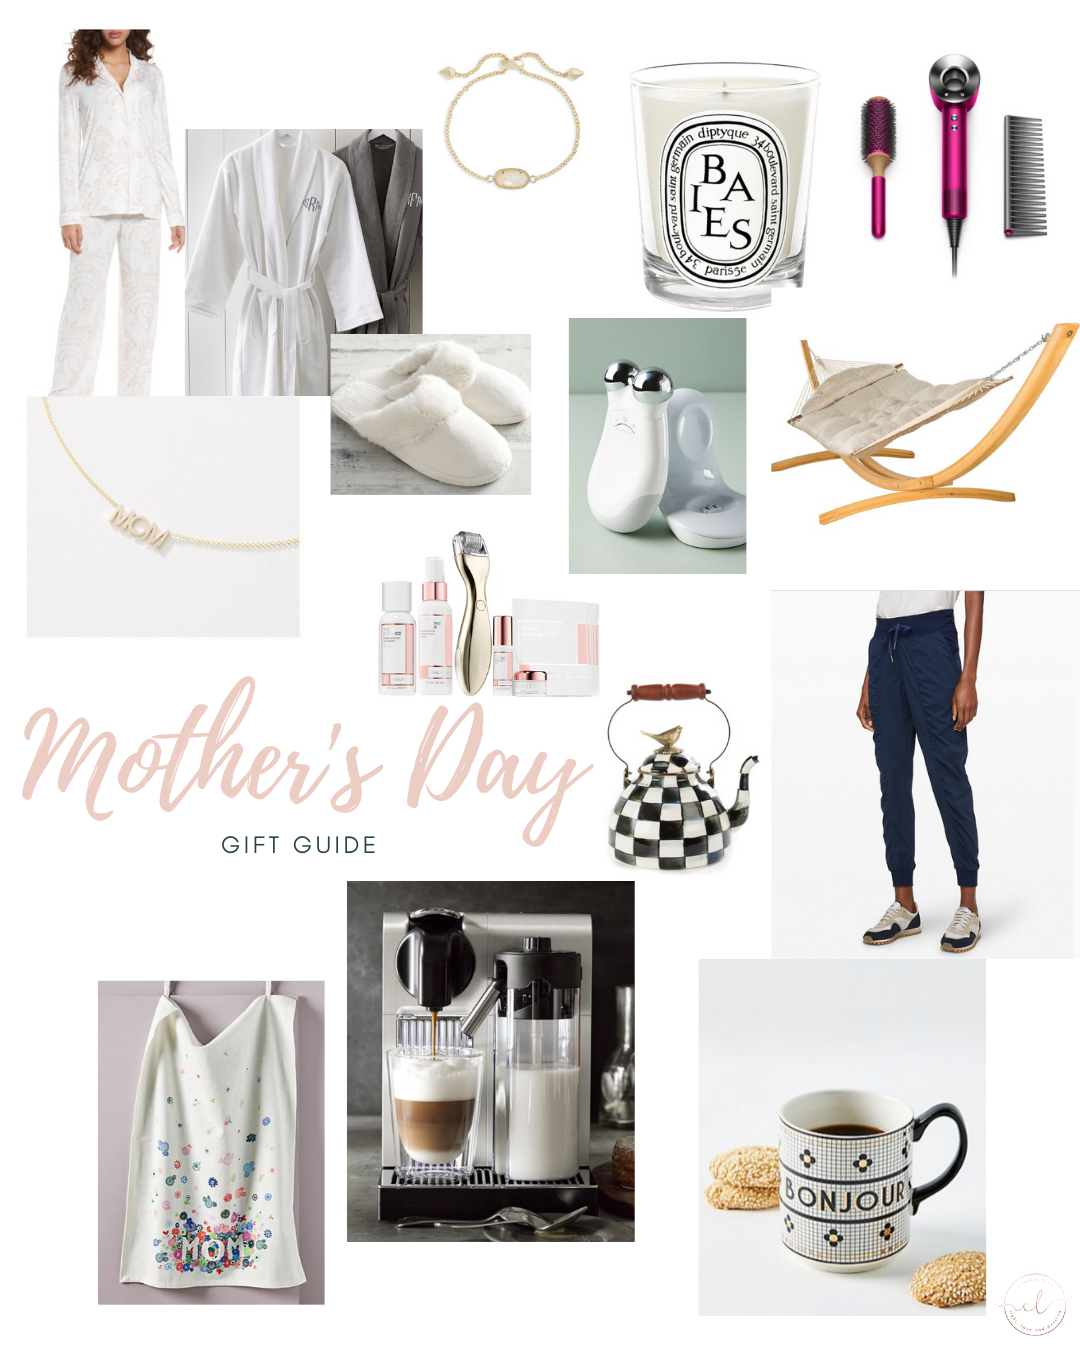 What to get mom for Mother's Day